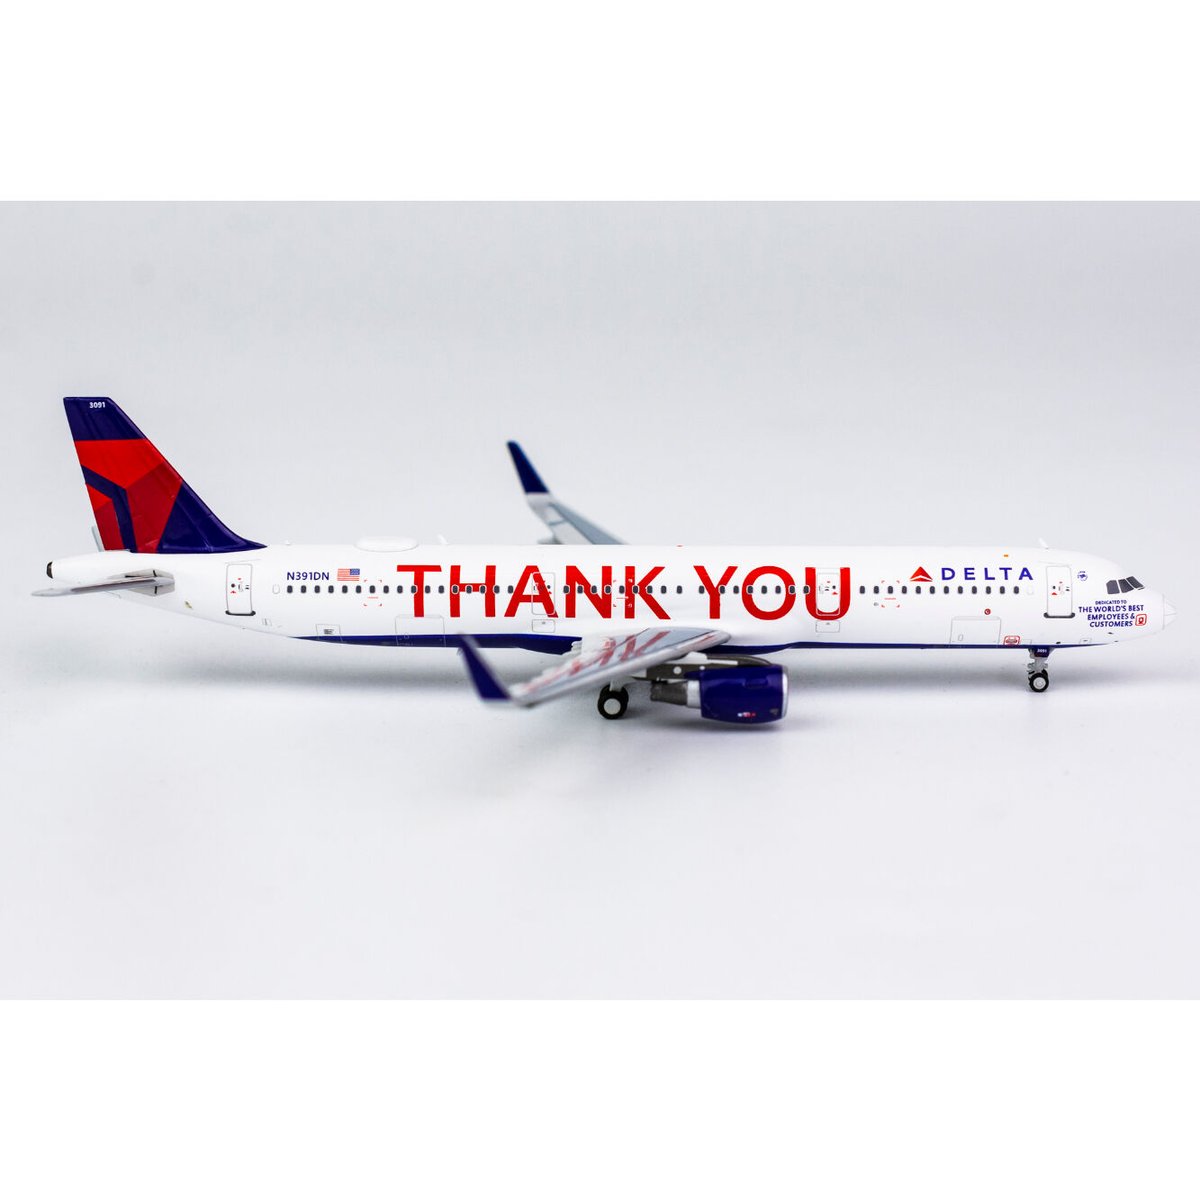 A/w デルタ航空 NDN with "THANK YOU"